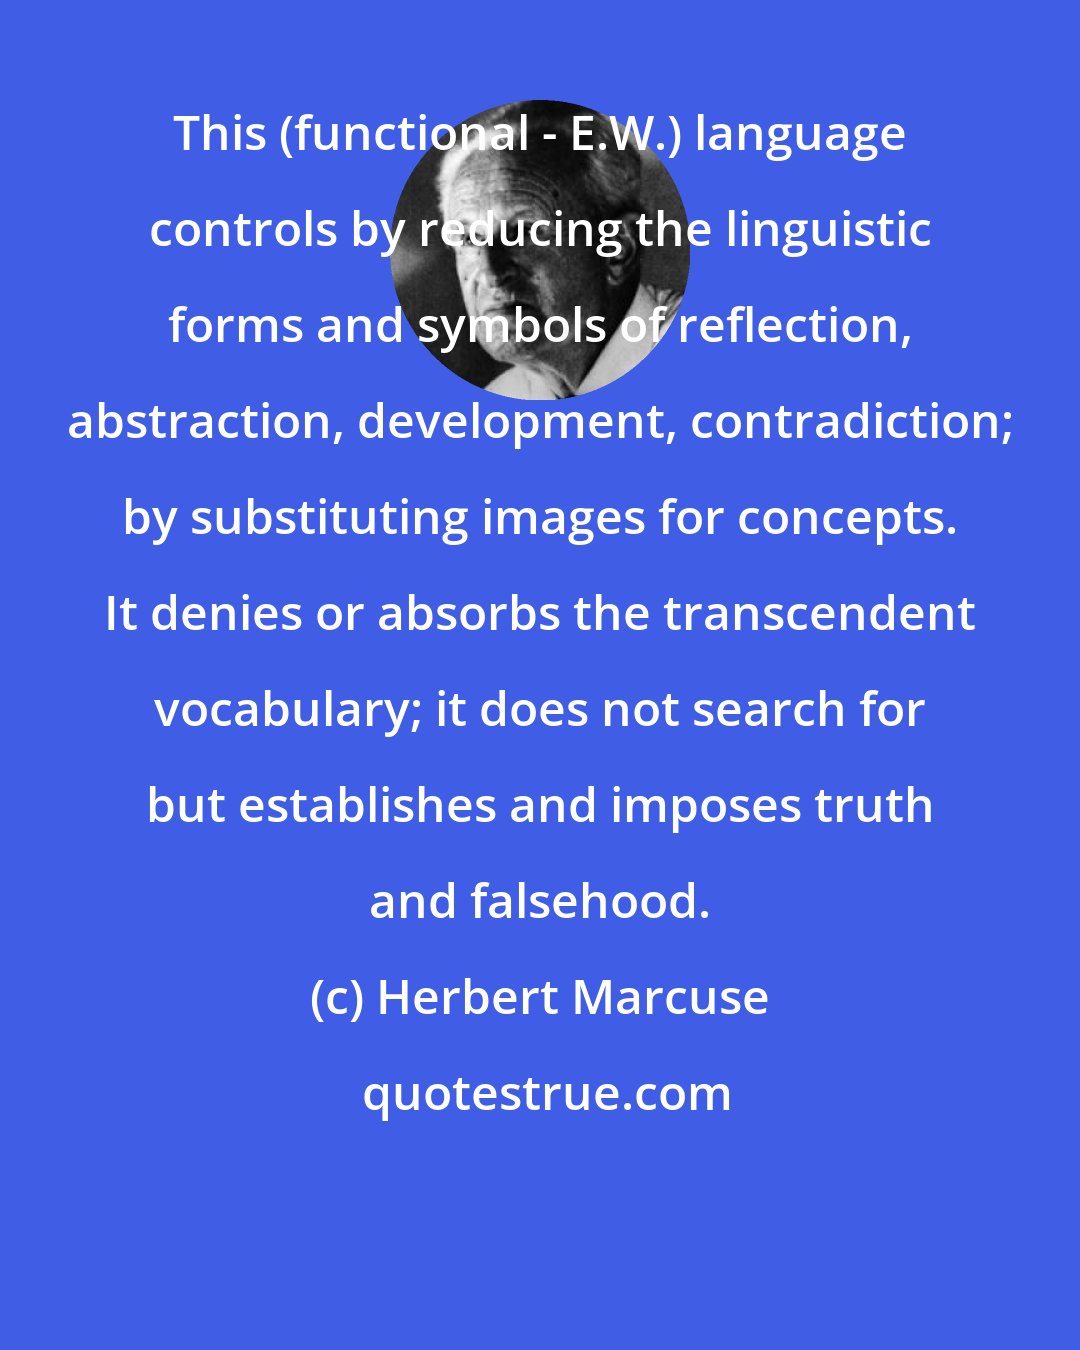 Herbert Marcuse: This (functional - E.W.) language controls by reducing the linguistic forms and symbols of reflection, abstraction, development, contradiction; by substituting images for concepts. It denies or absorbs the transcendent vocabulary; it does not search for but establishes and imposes truth and falsehood.